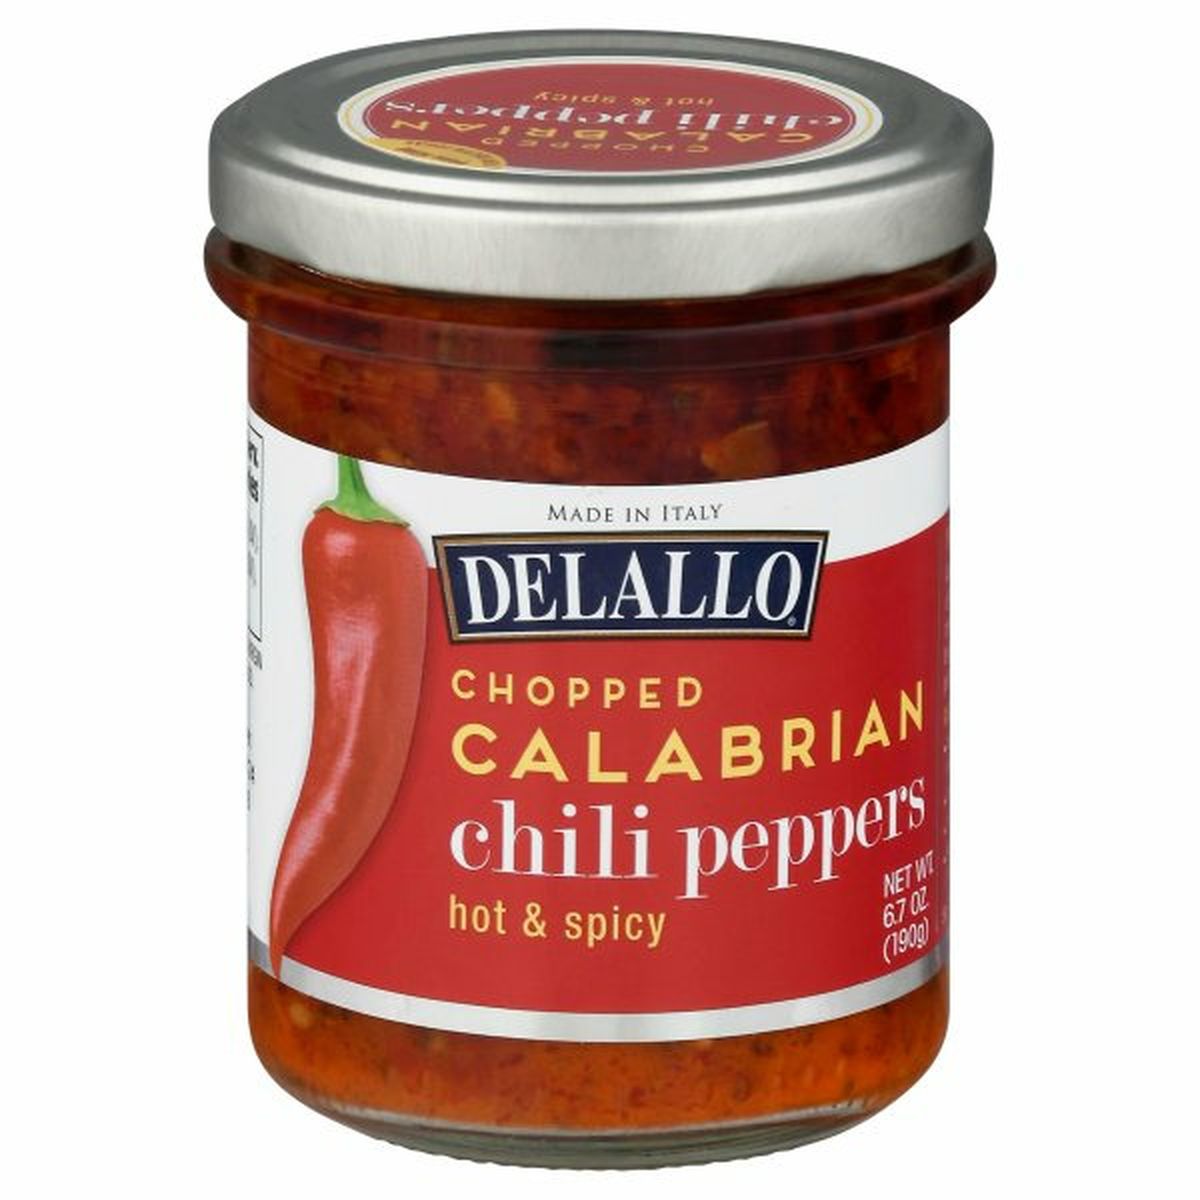 Calories in DeLallo Chili Peppers, Calabrian, Chopped